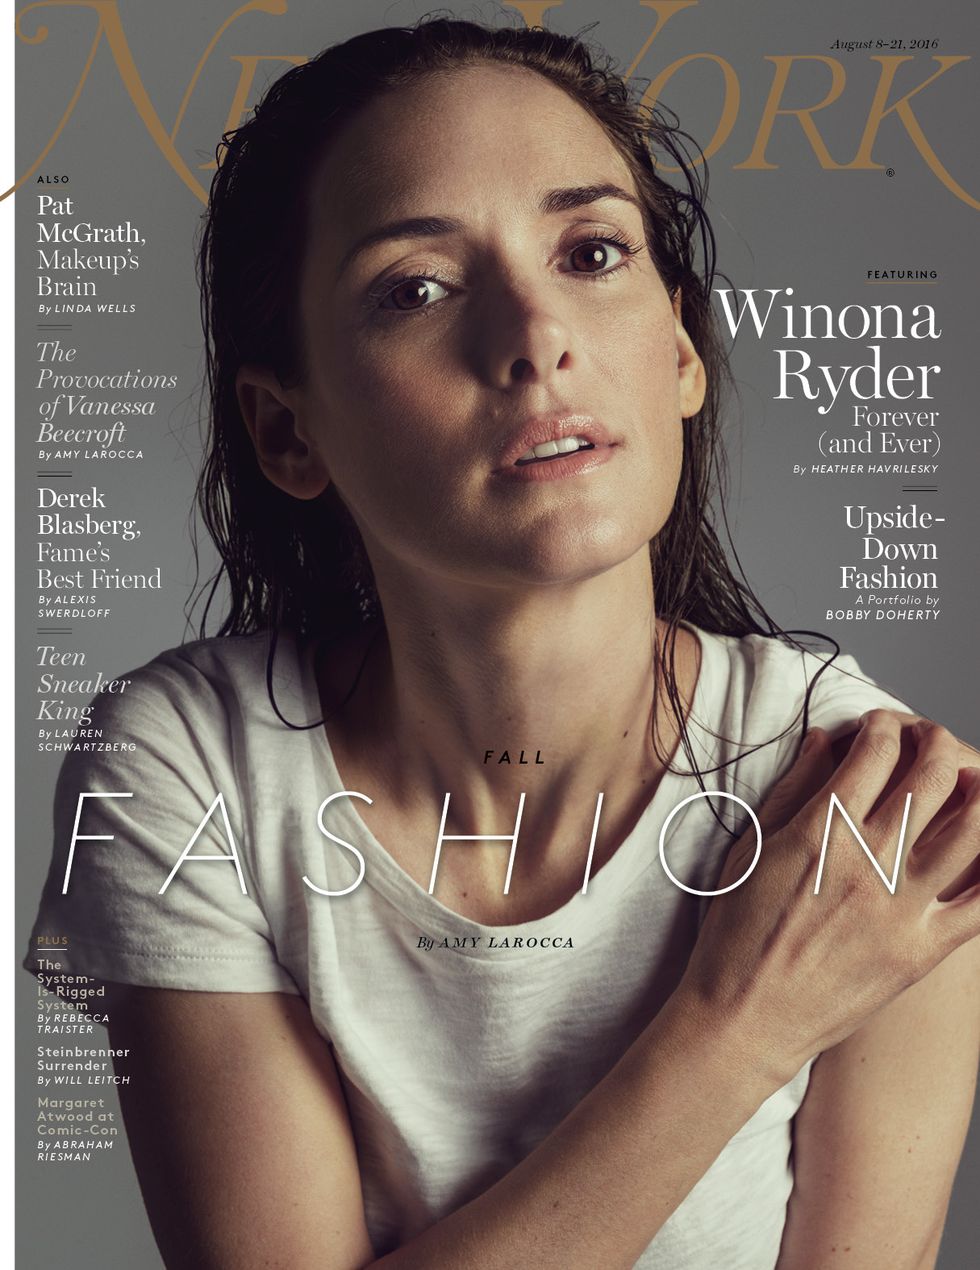 Winona Ryder on the cover of New York Magazine